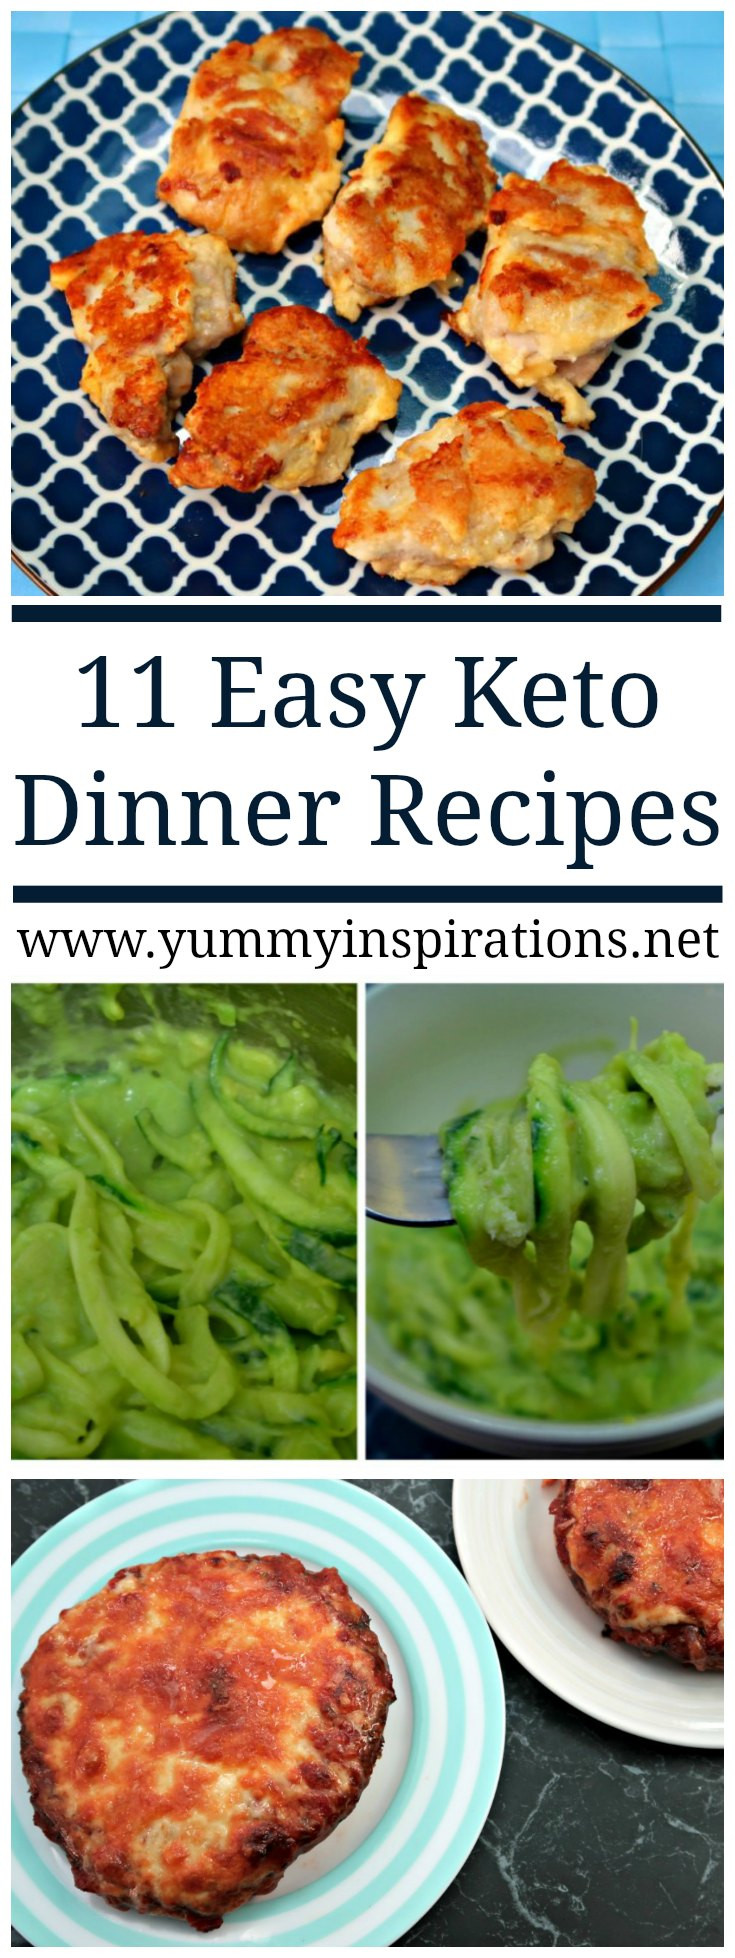 Keto Diet Recipes Easy Meals
 11 Easy Keto Dinner Recipes Quick Low Carb Ketogenic